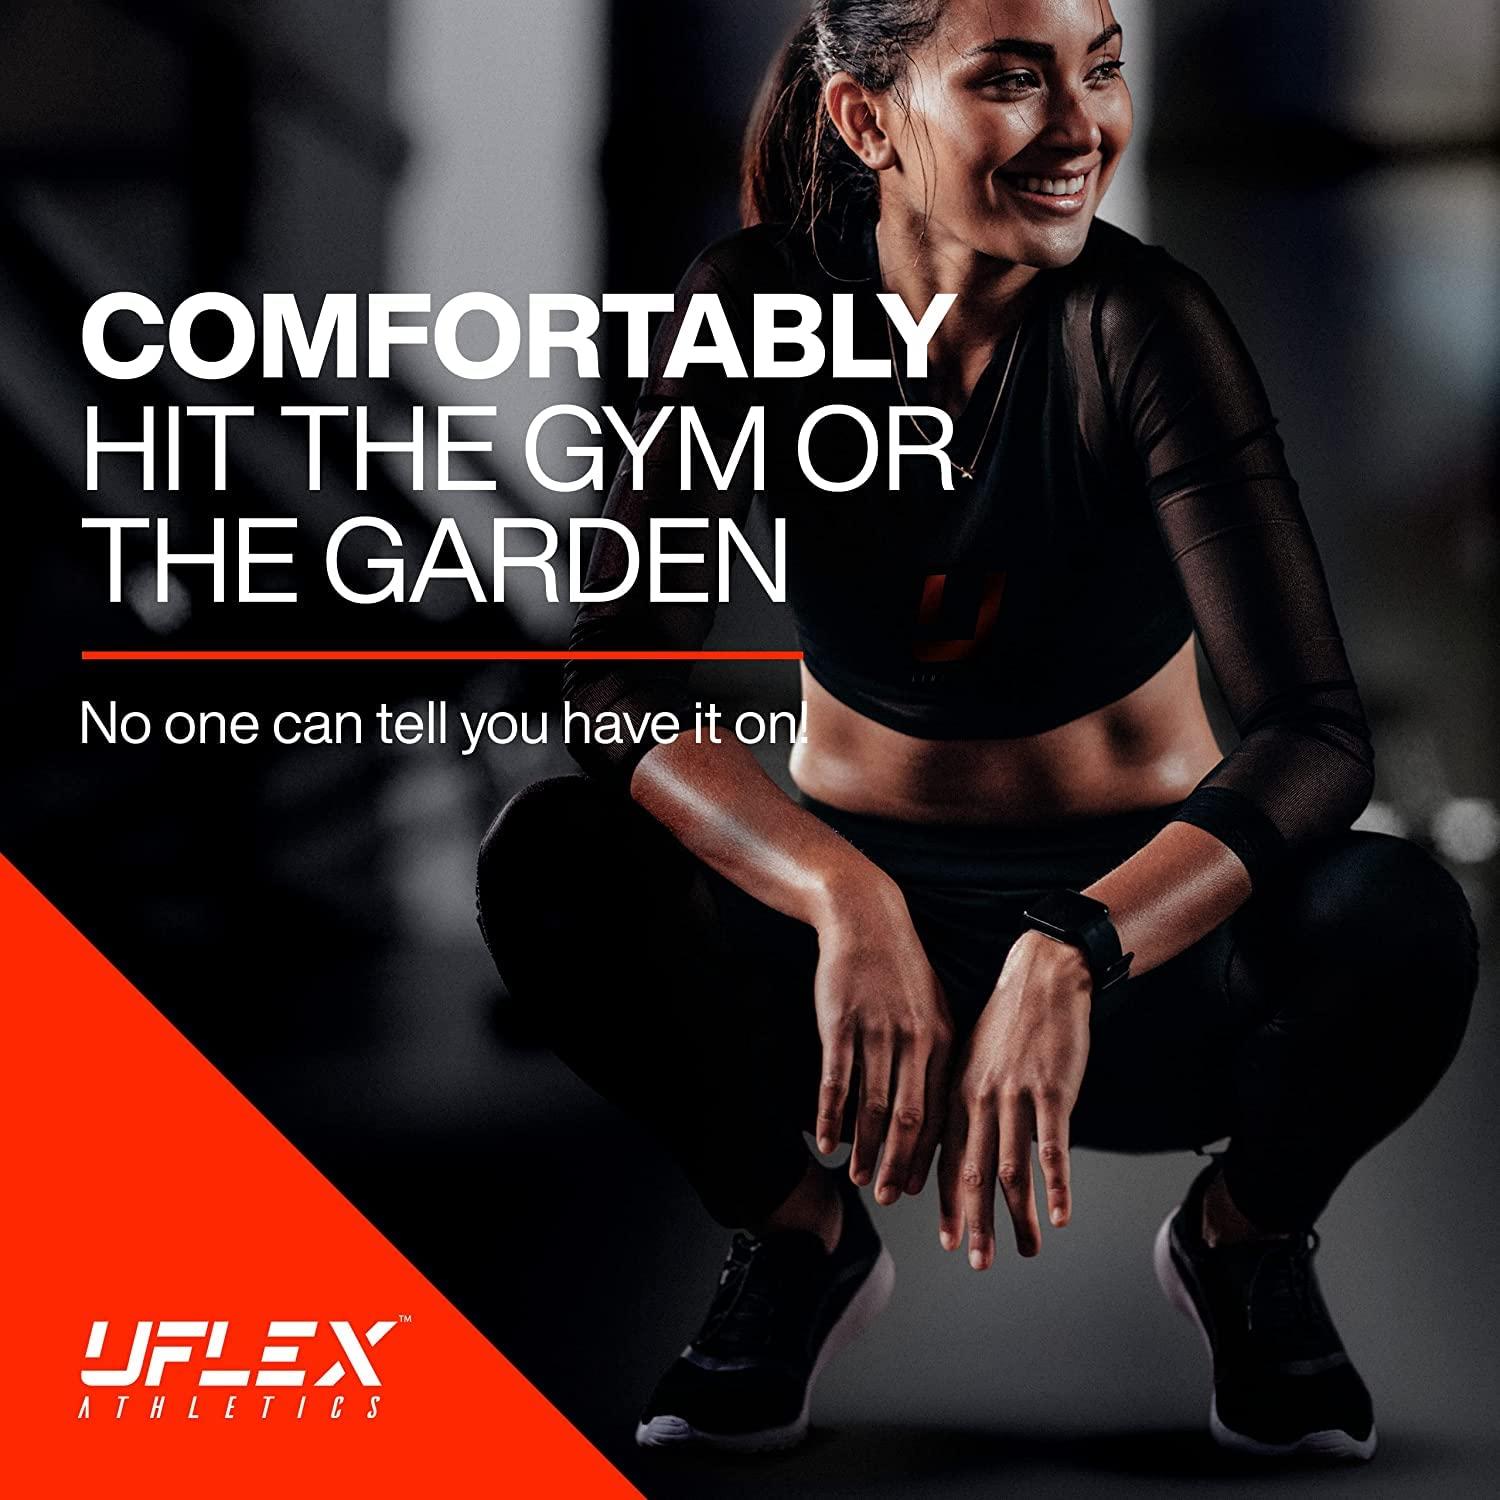 UFlex Knee Compression Sleeve Support for Women and Men - Non Slip